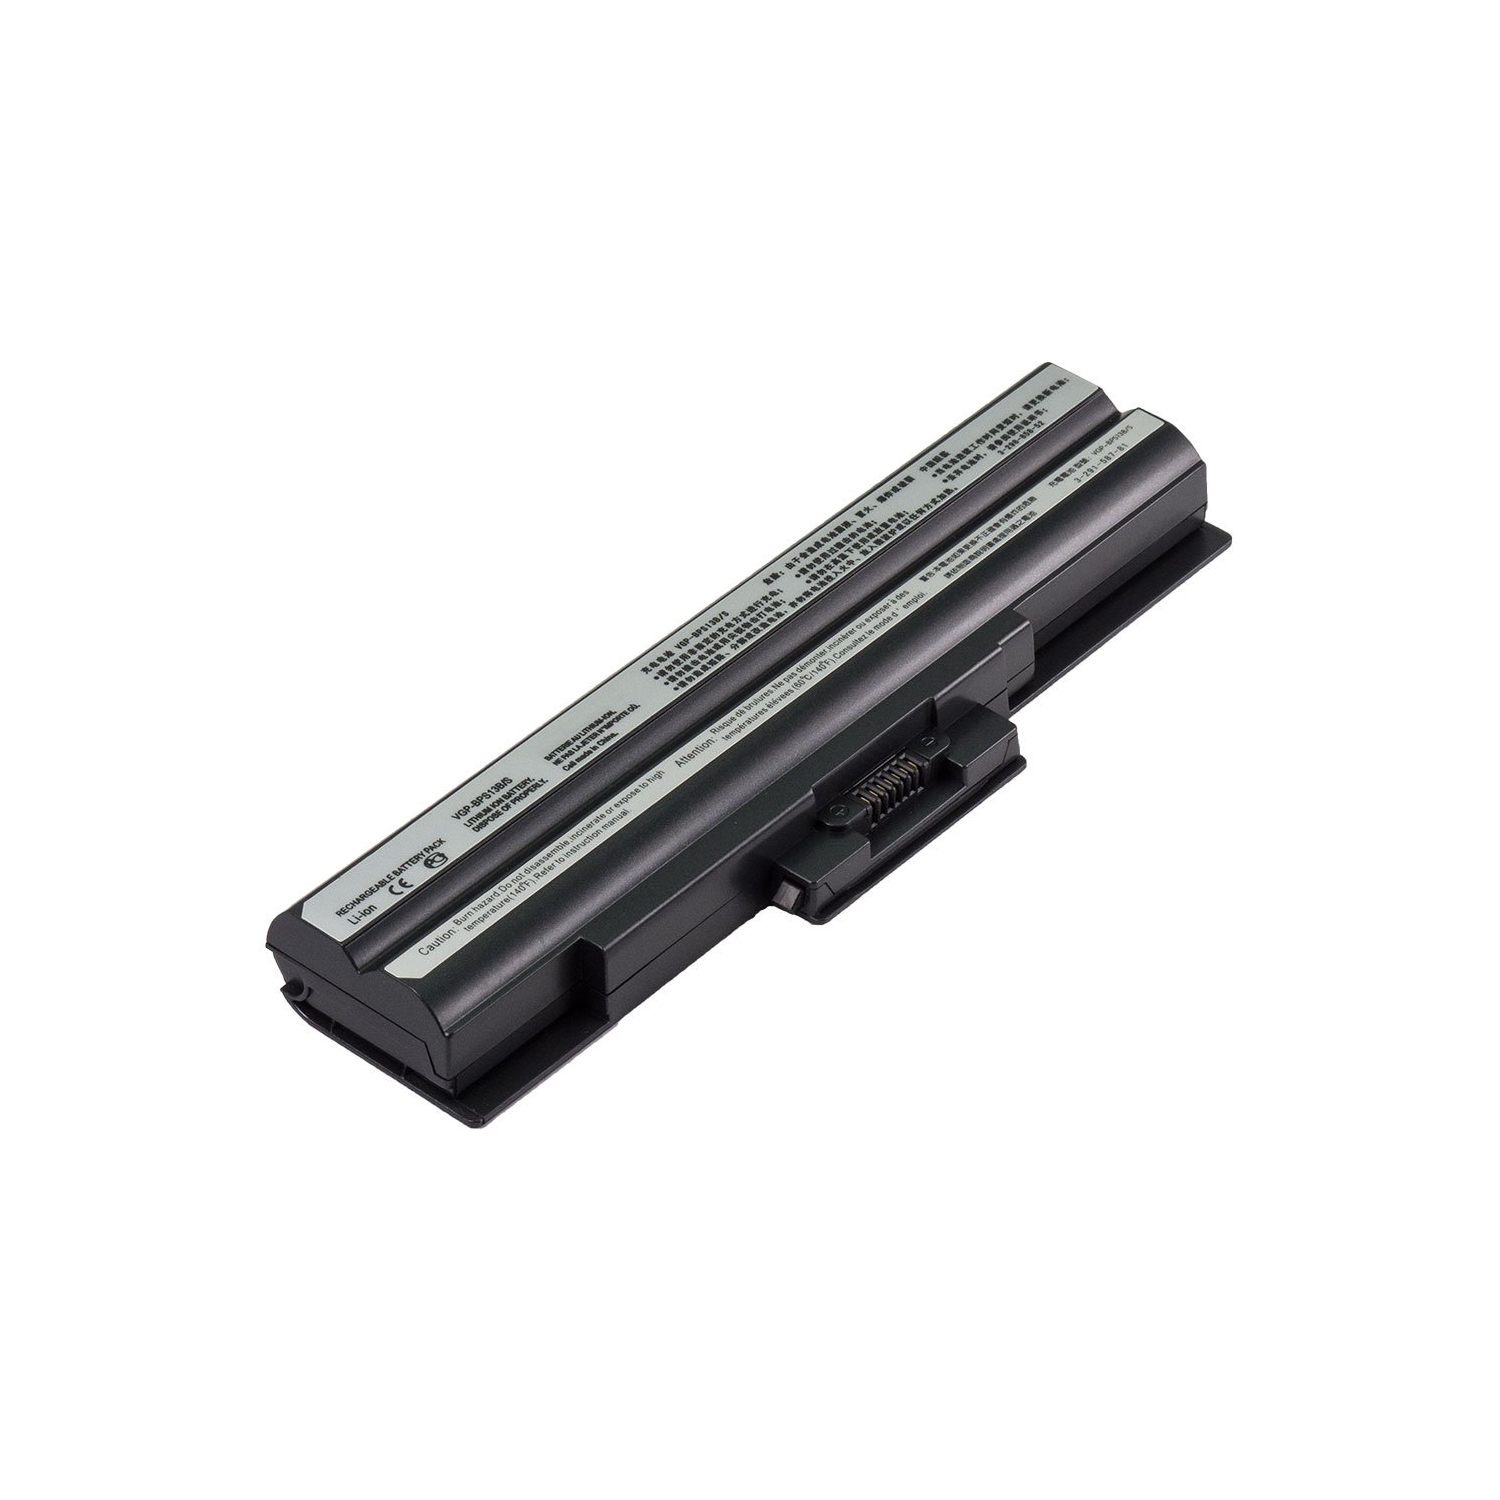 Laptop Battery Replacement for Sony VAIO VGN-CS120J/P, VGP-BPS13, VGP-BPS13/S, VGP-BPS13A/Q, VGP-BPS13B/B, VGP-BSP13/S